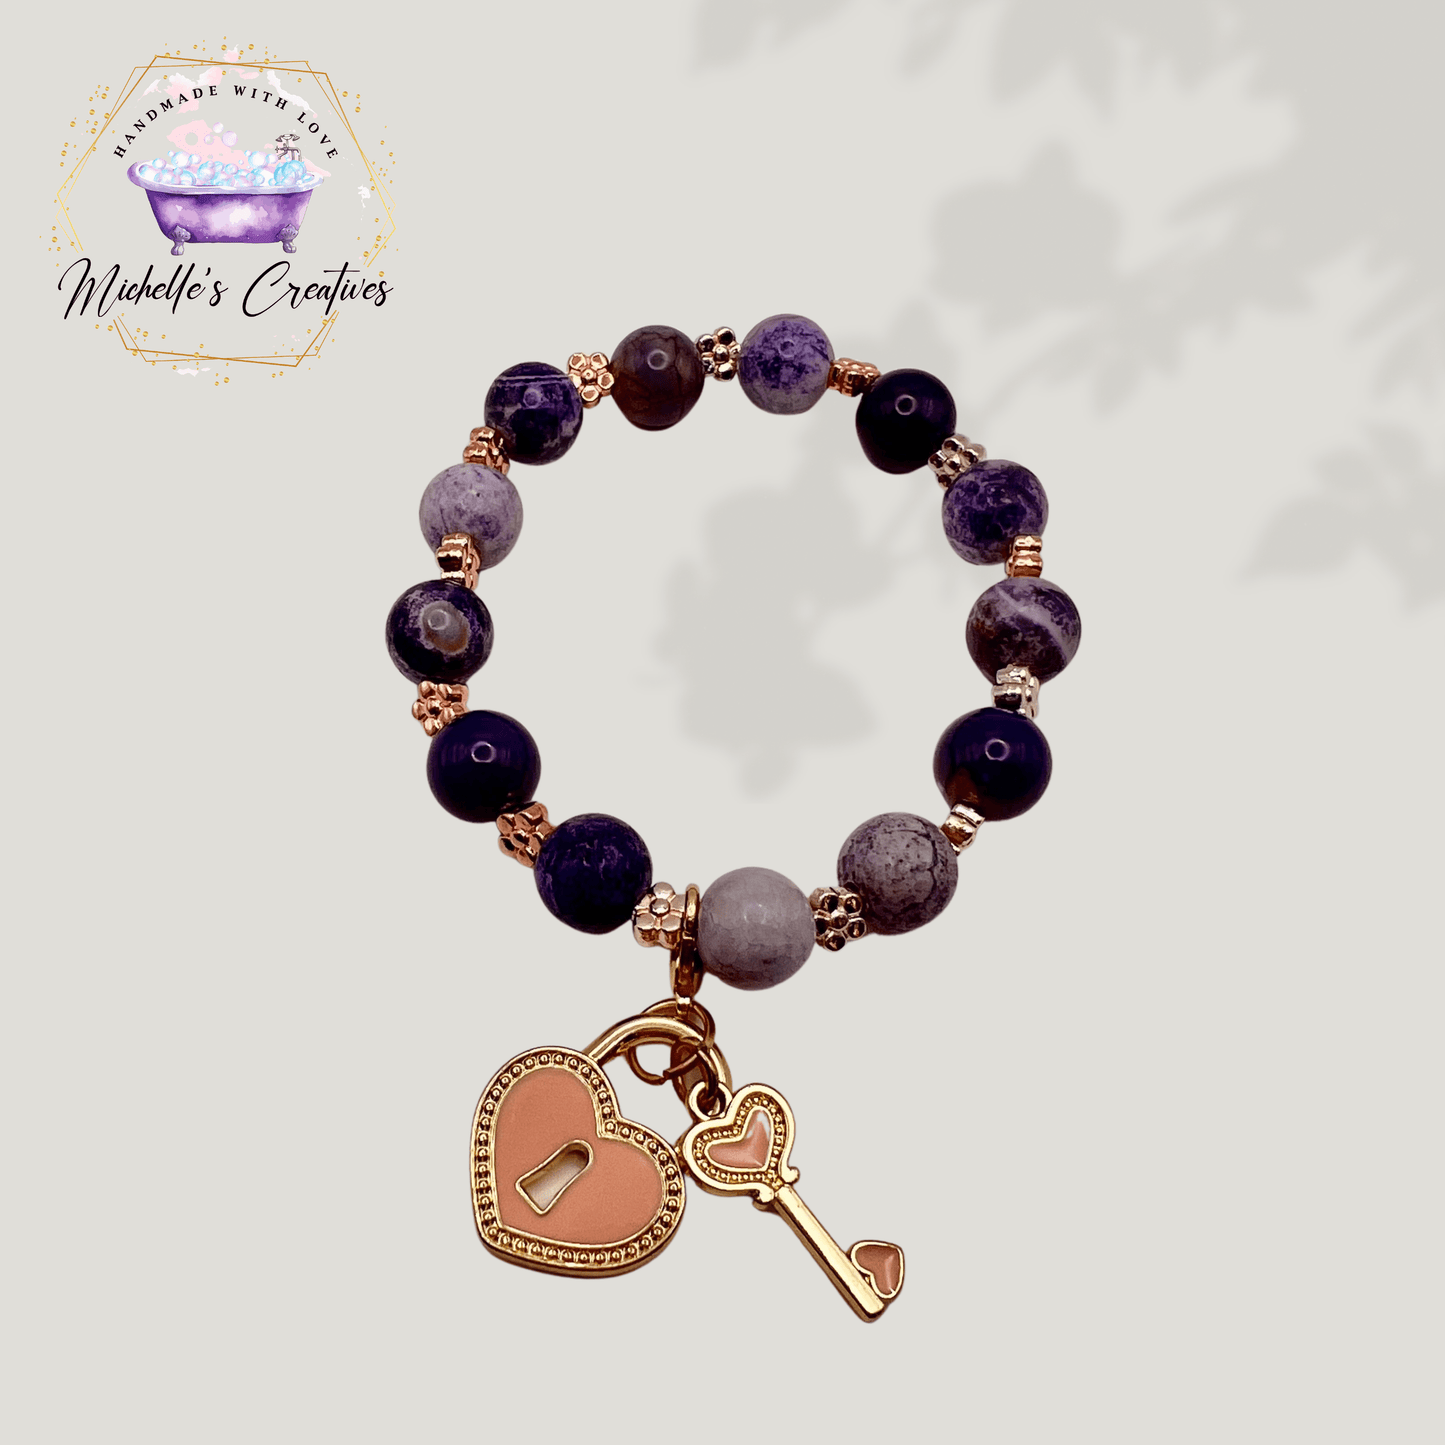 Michelle's Creatives Bracelet Purple Agate Beaded Stretch Bracelet with Lock and Key Charm